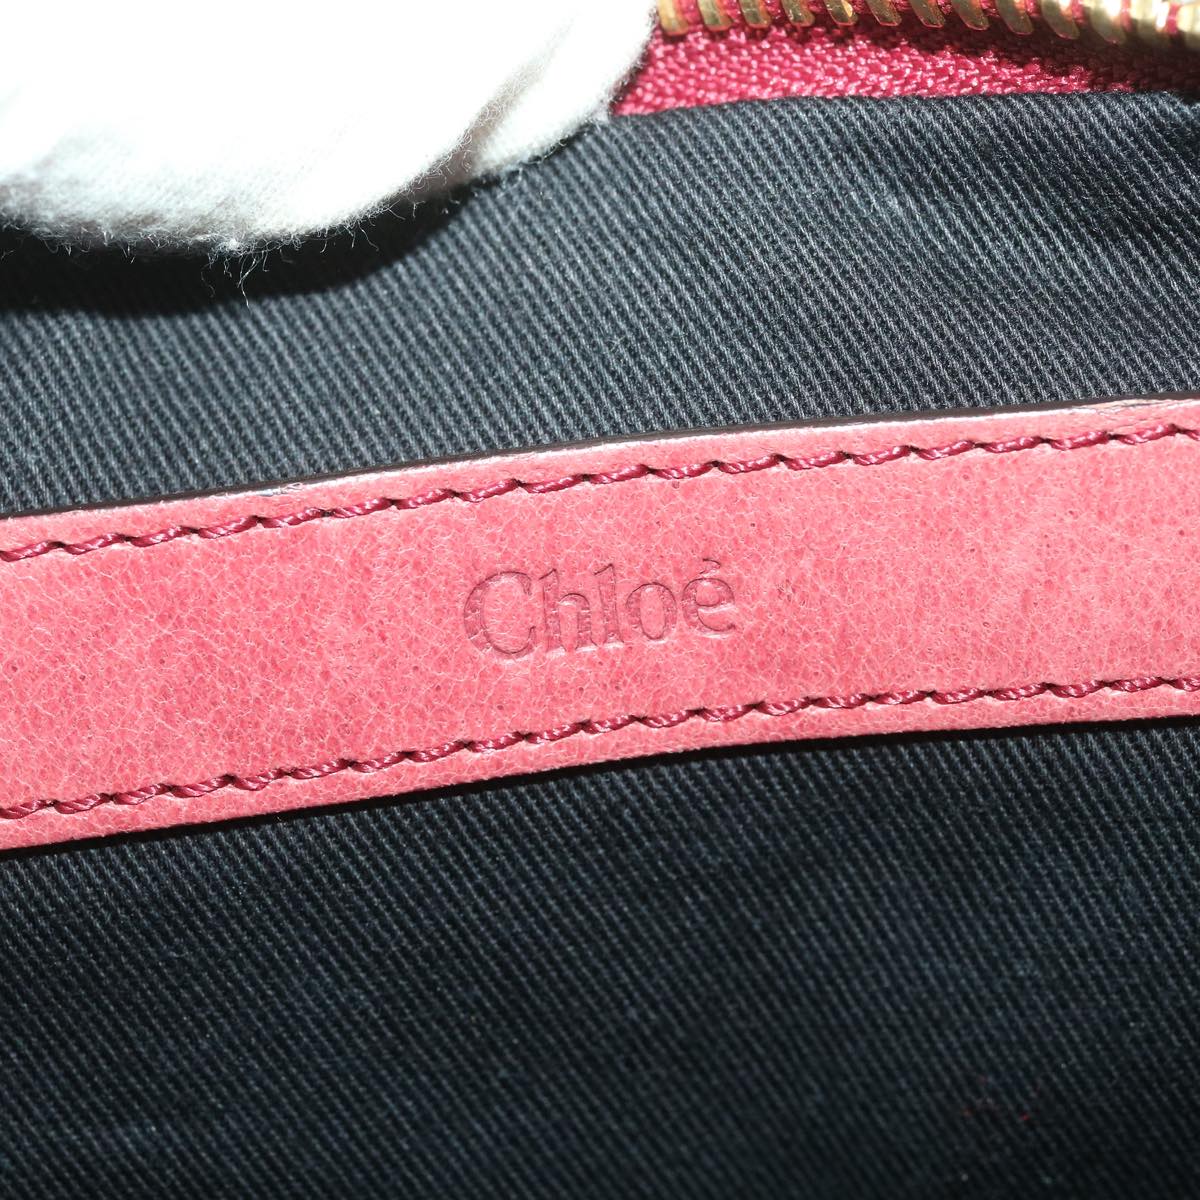 Chloe Hand Bag Leather 2way Pink 03-11-50 Auth 37841